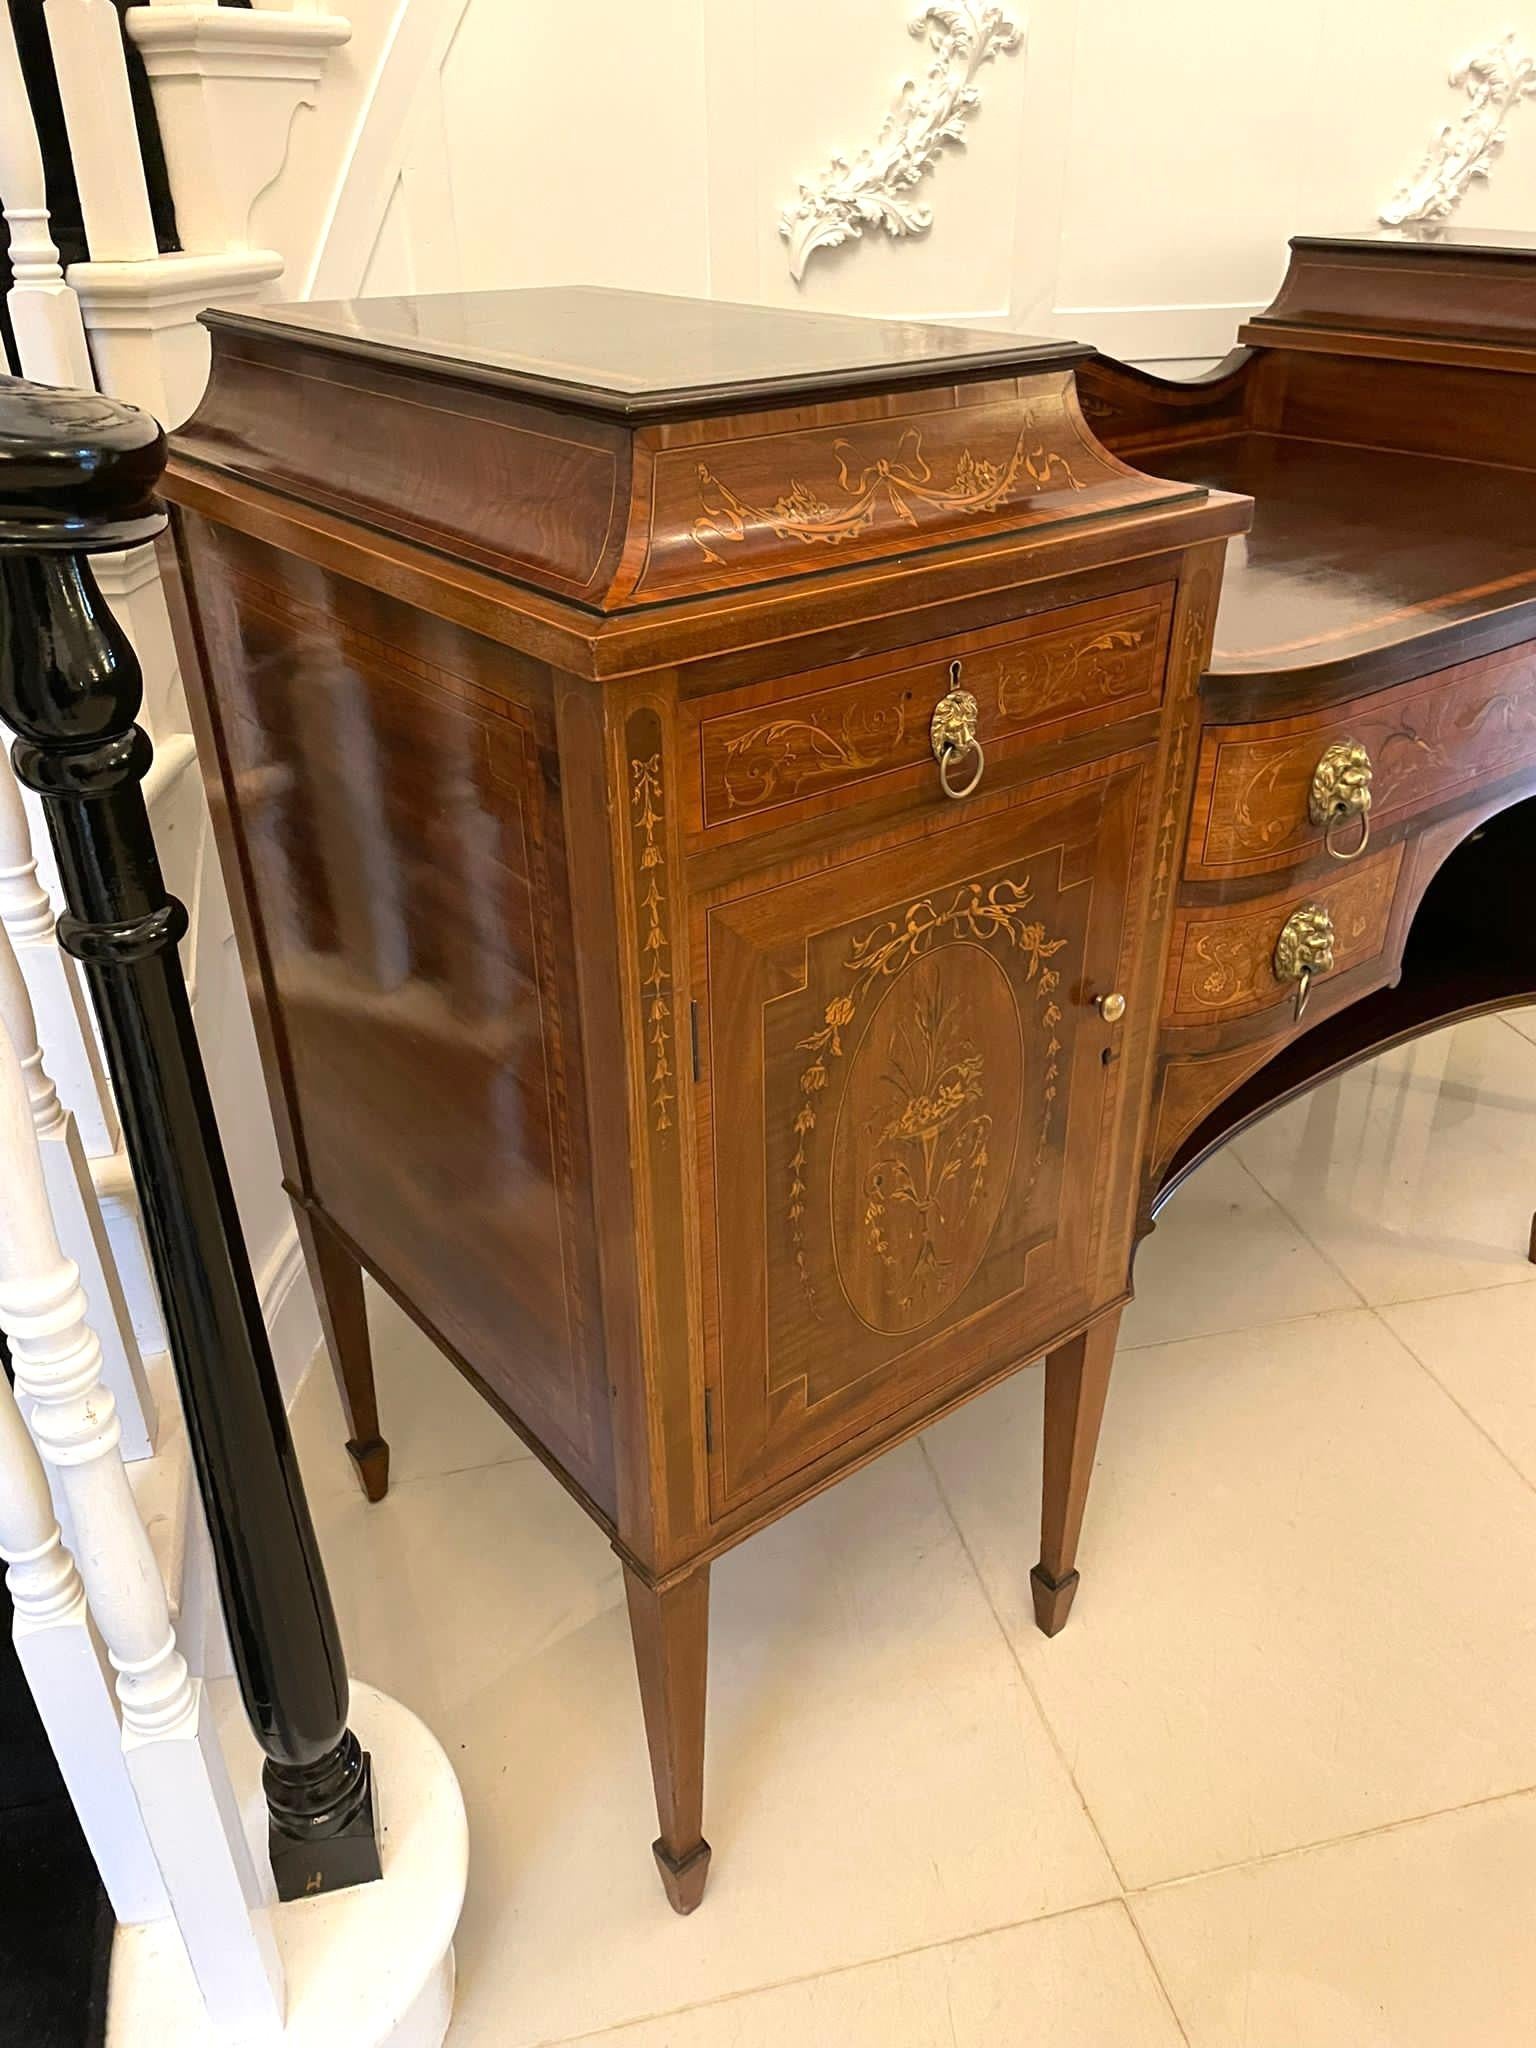 19th Century Fine Quality Antique Mahogany Inlaid Marquetry Sideboard By Hewetsons, London For Sale